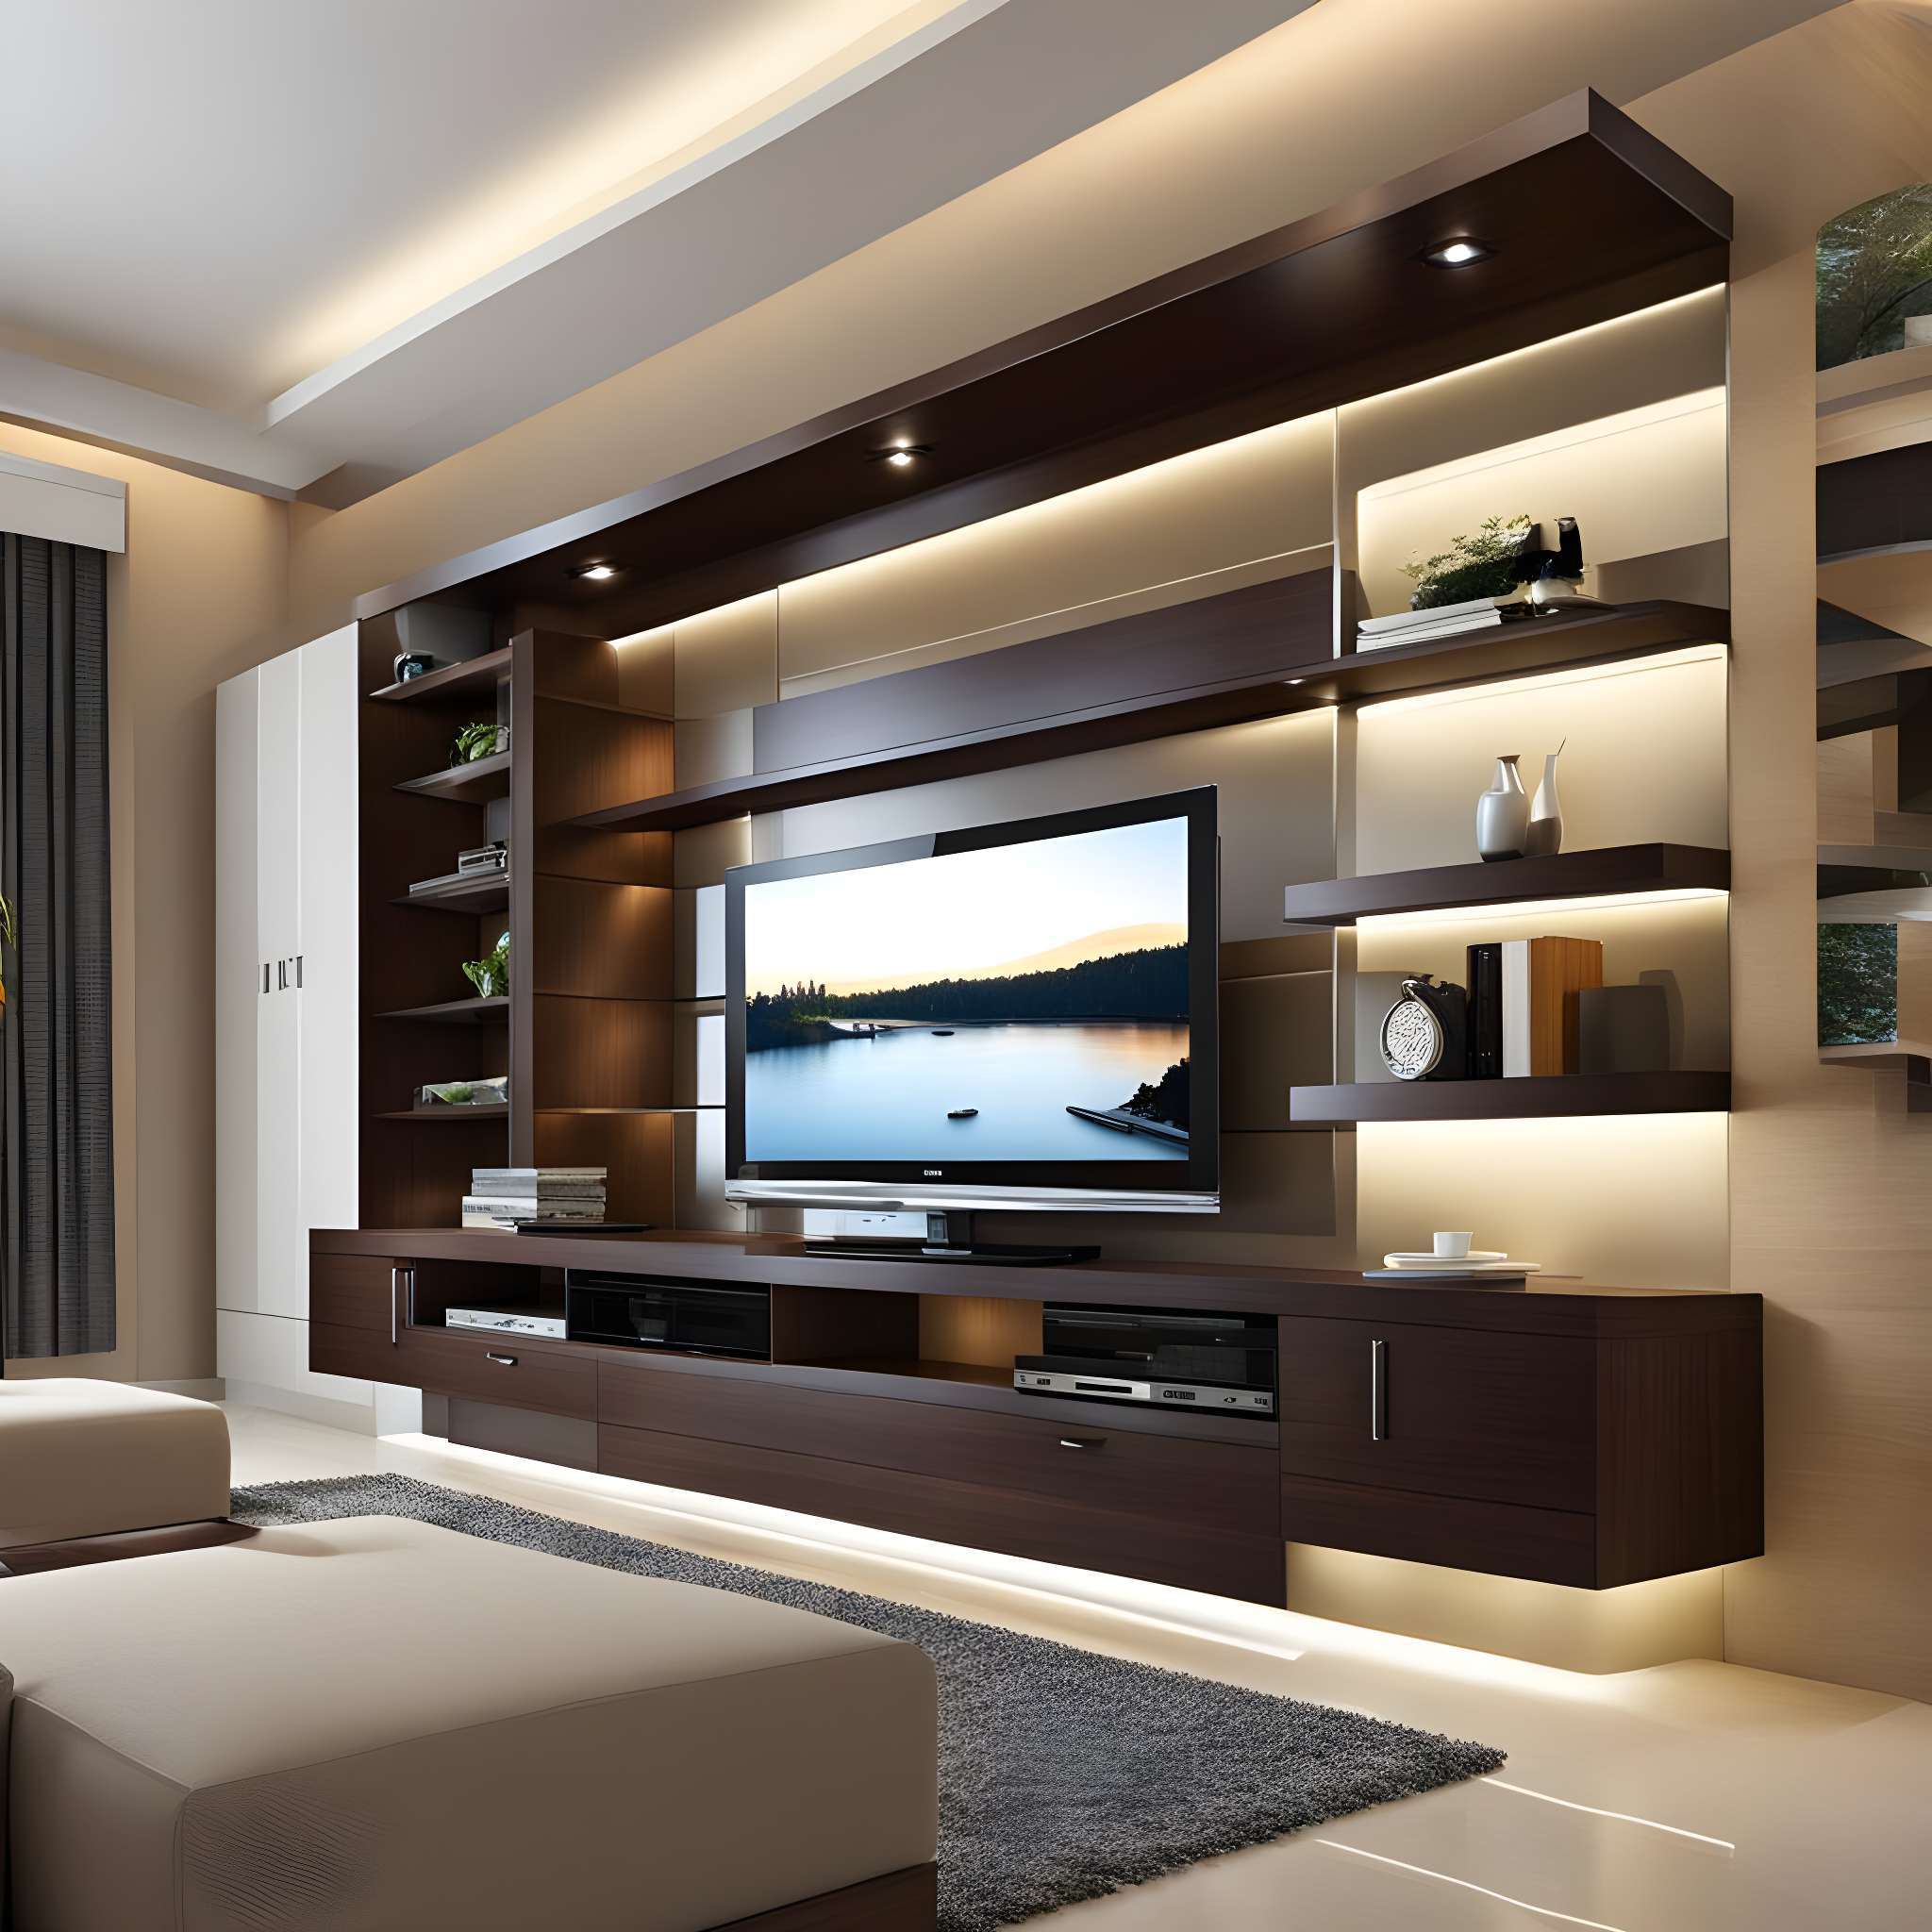 BUDGET FRIENDLY (VERY LESS PRICE) INTERIOR DESIGNERS IN HSR LAYOUT